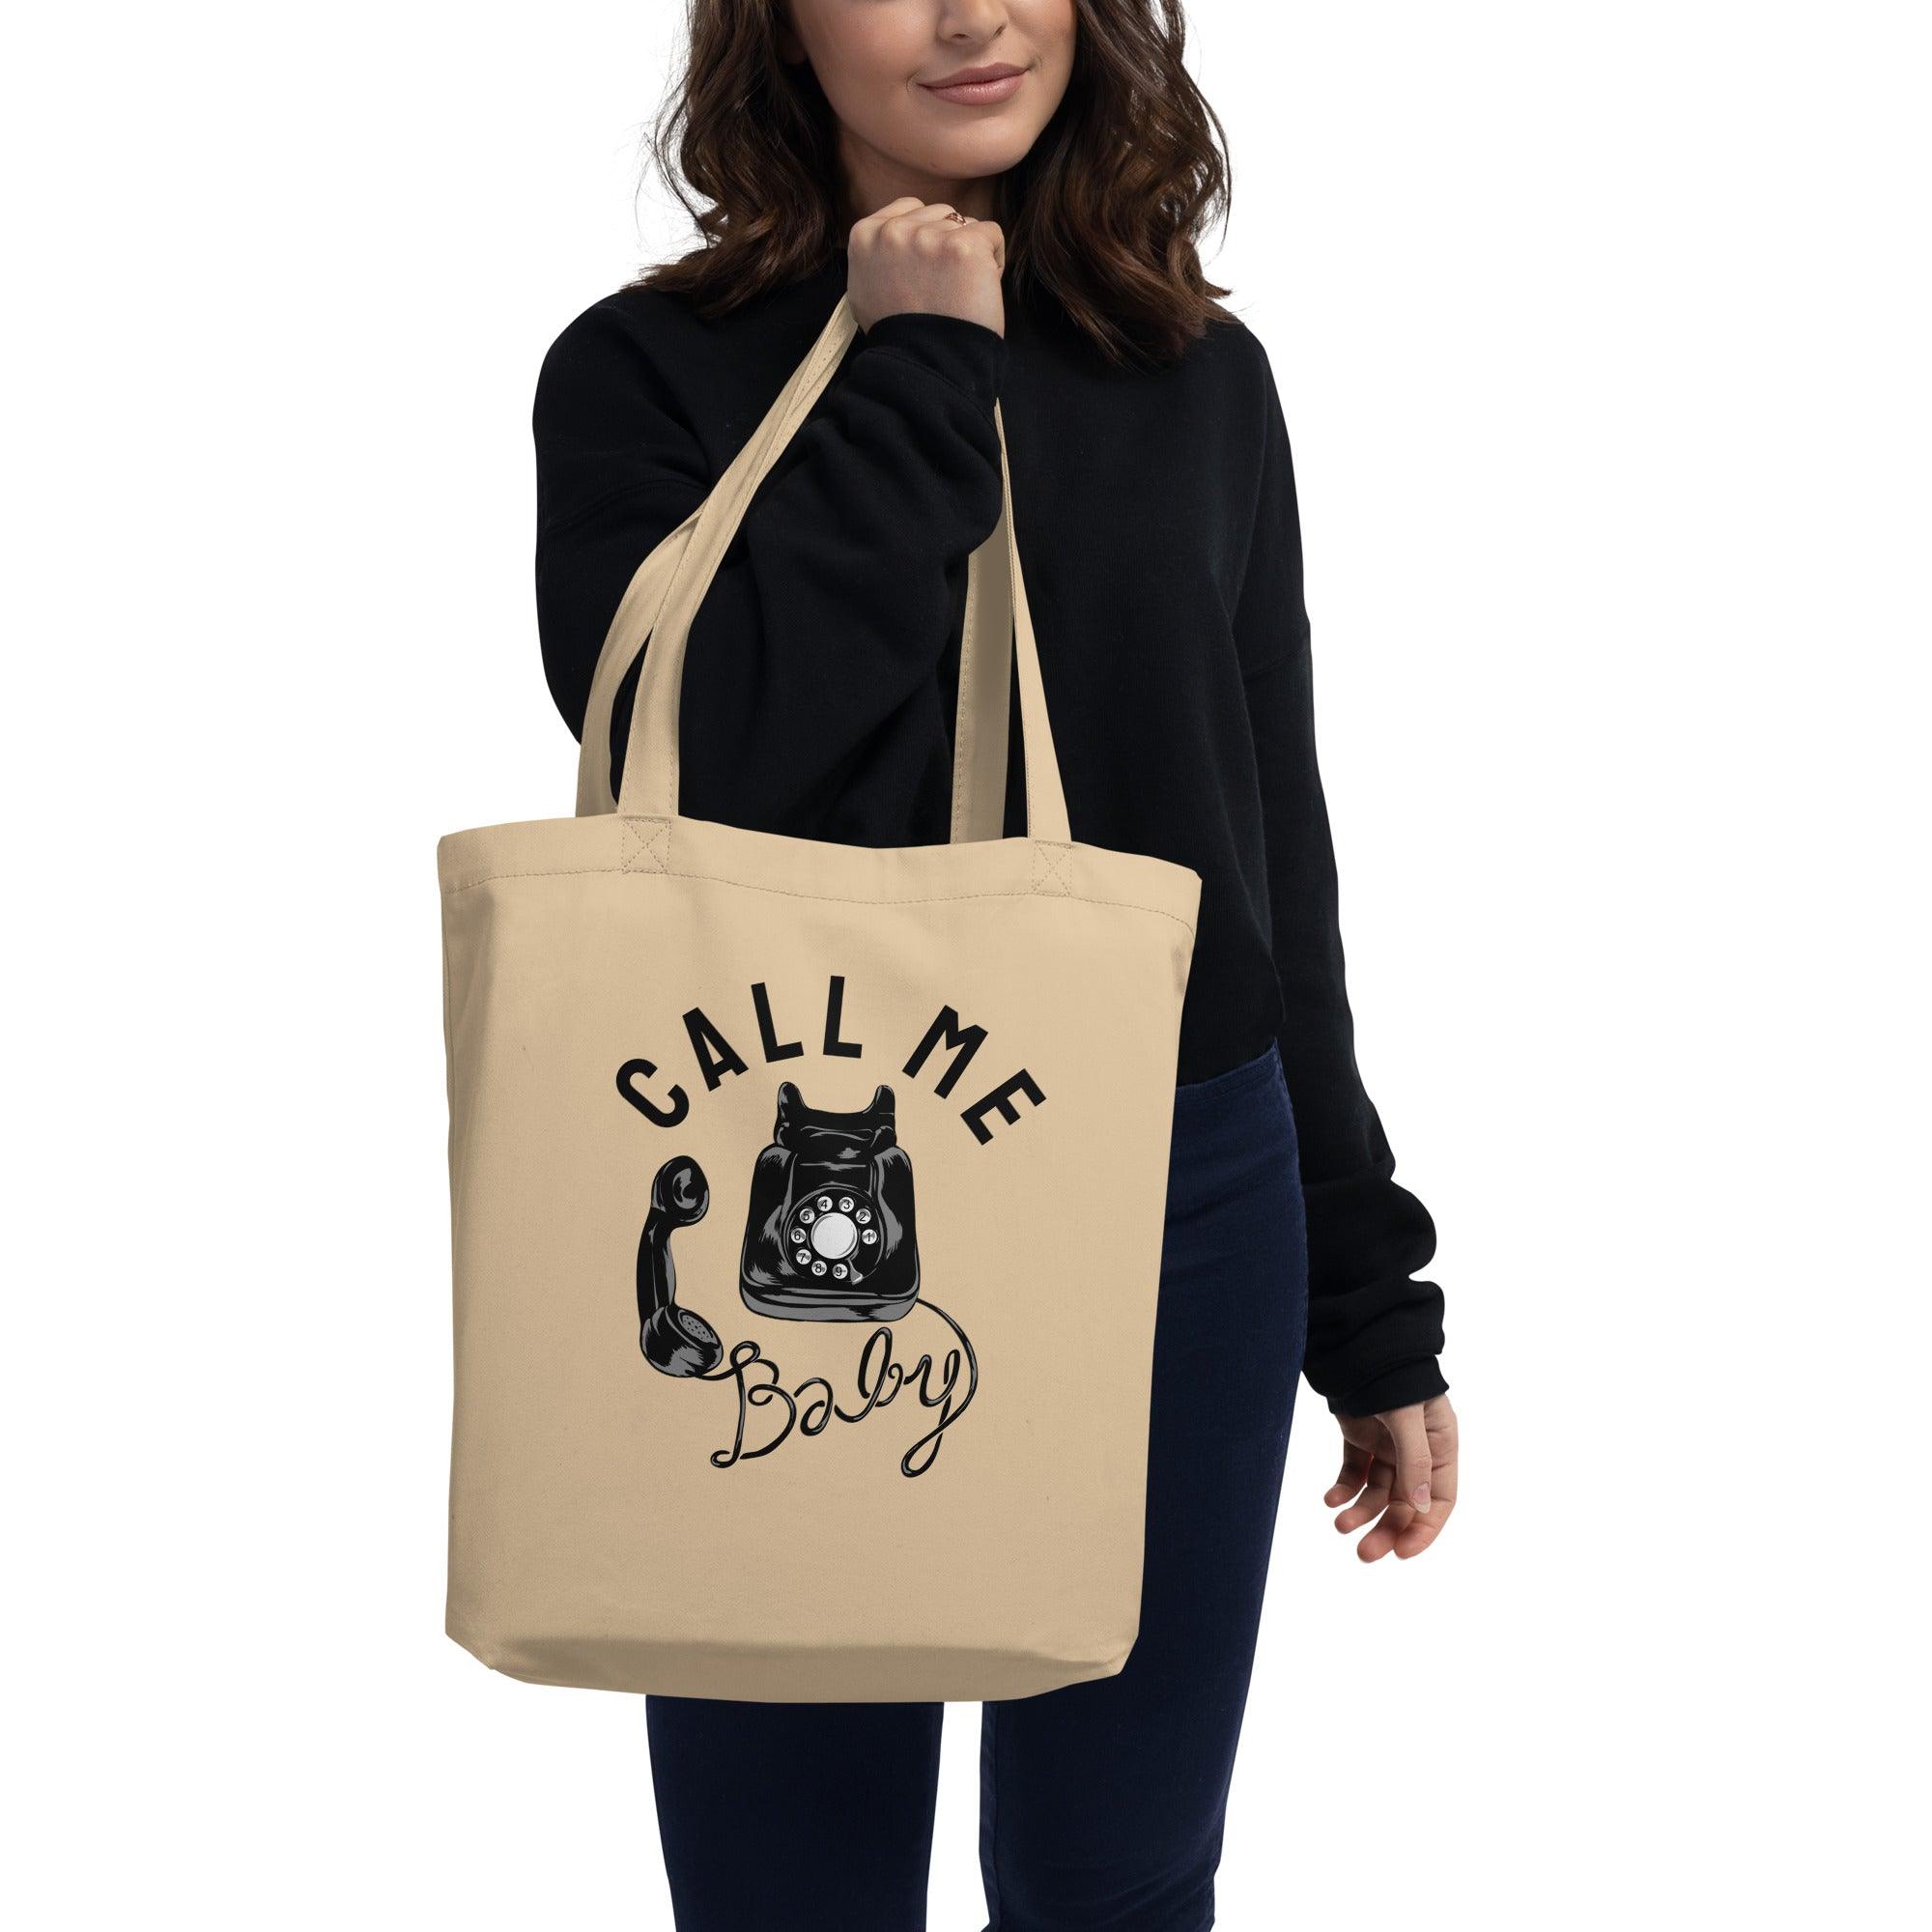 eco-tote-bag-oyster-front-655e27a3caa90